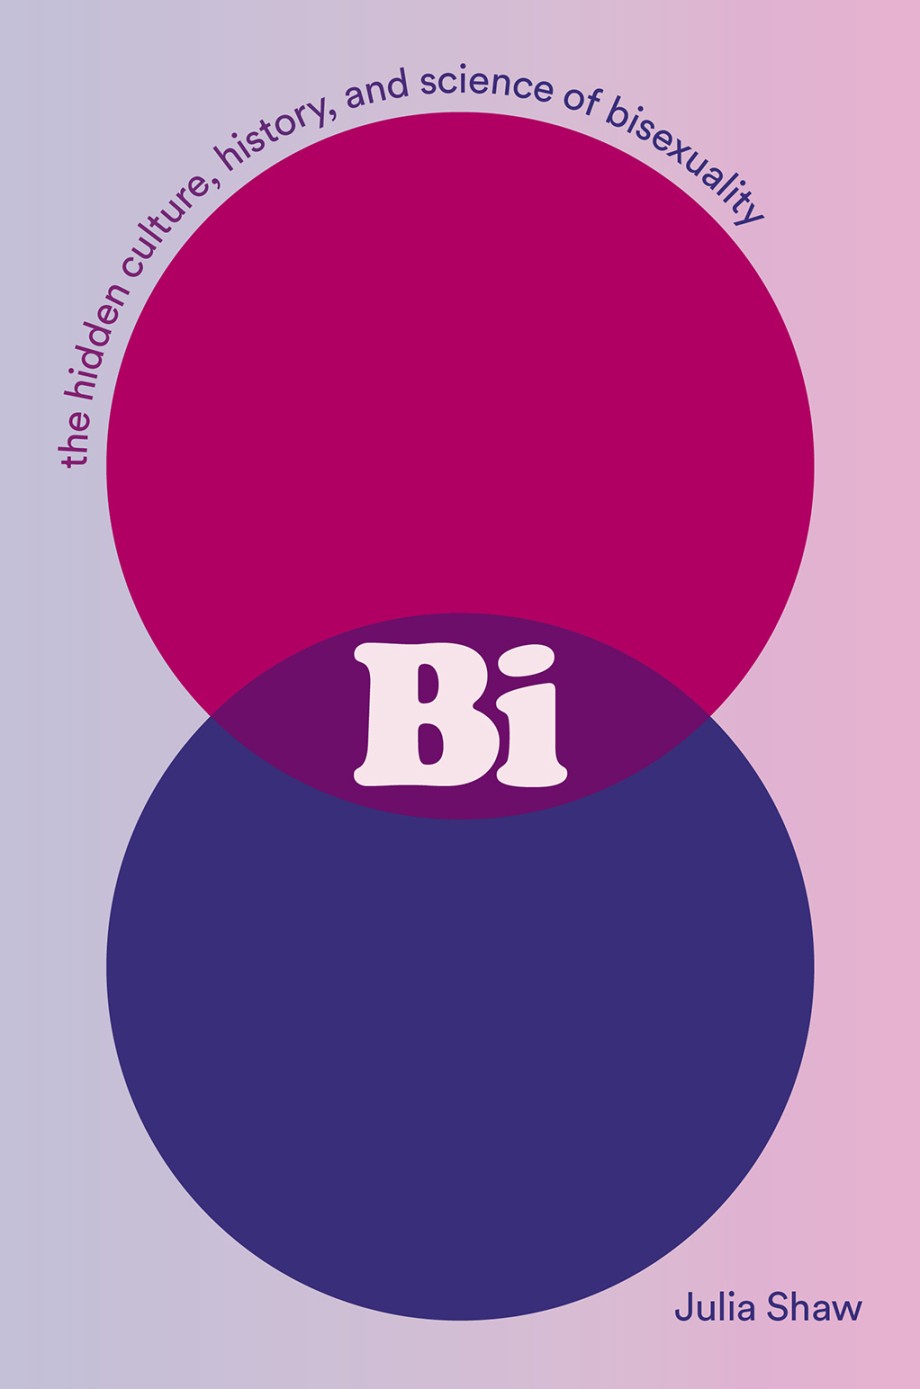 Bi The Hidden Culture, History, and Science of Bisexuality